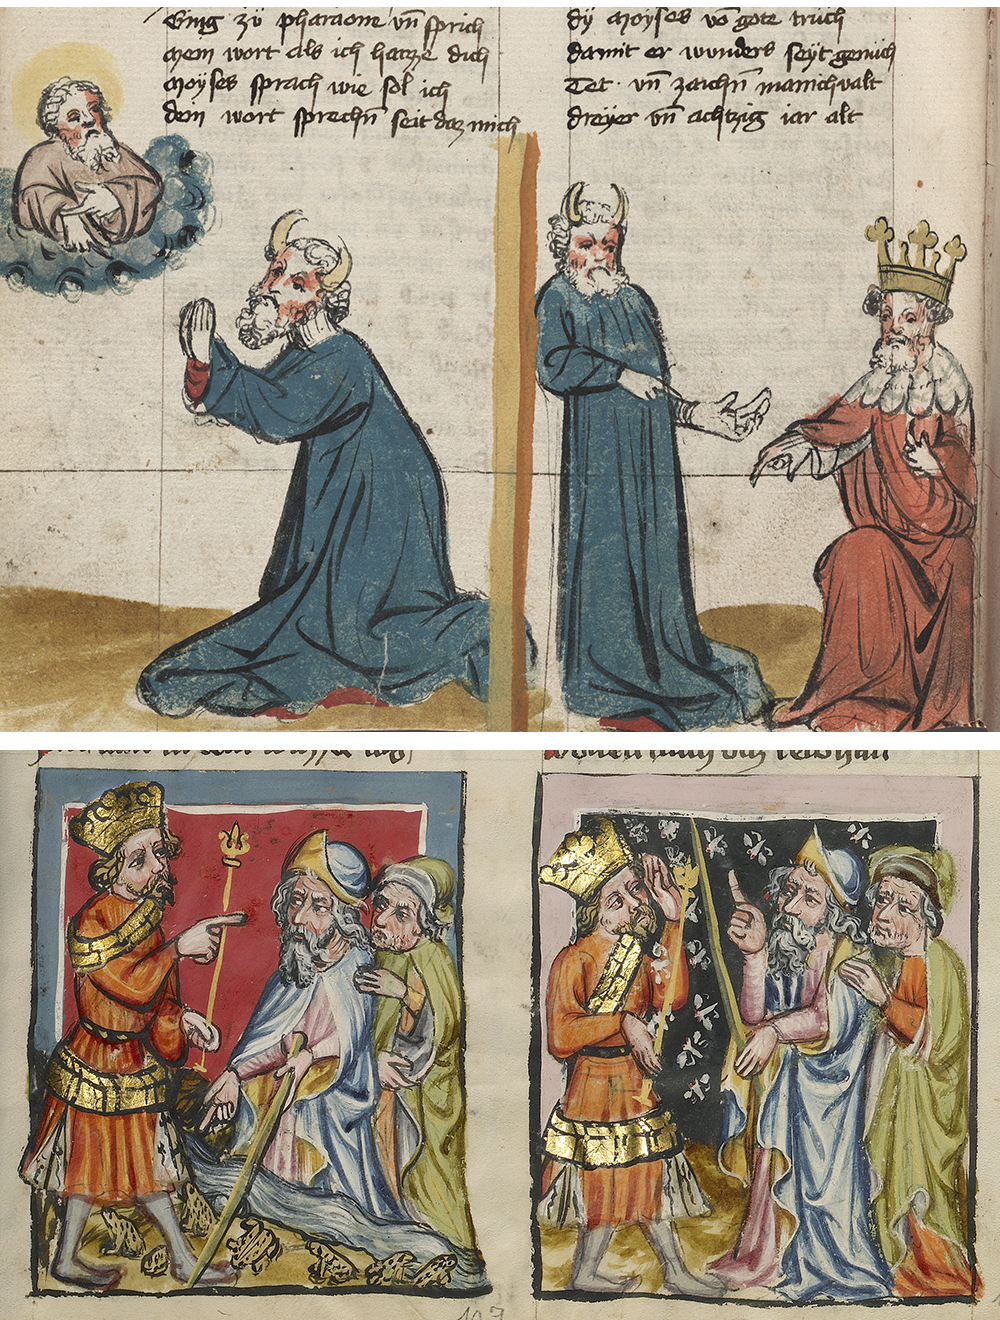 Top: Page from Weltchronik, by Rudolf von Ems, 1402. The New York Public Library, Spencer Collection. Bottom: The Plague of Frogs; The Plague of Maggots, by Rudolf von Ems, c. 1400. © The J. Paul Getty Museum, Los Angeles; digital image courtesy of the Getty’s Open Content Program.